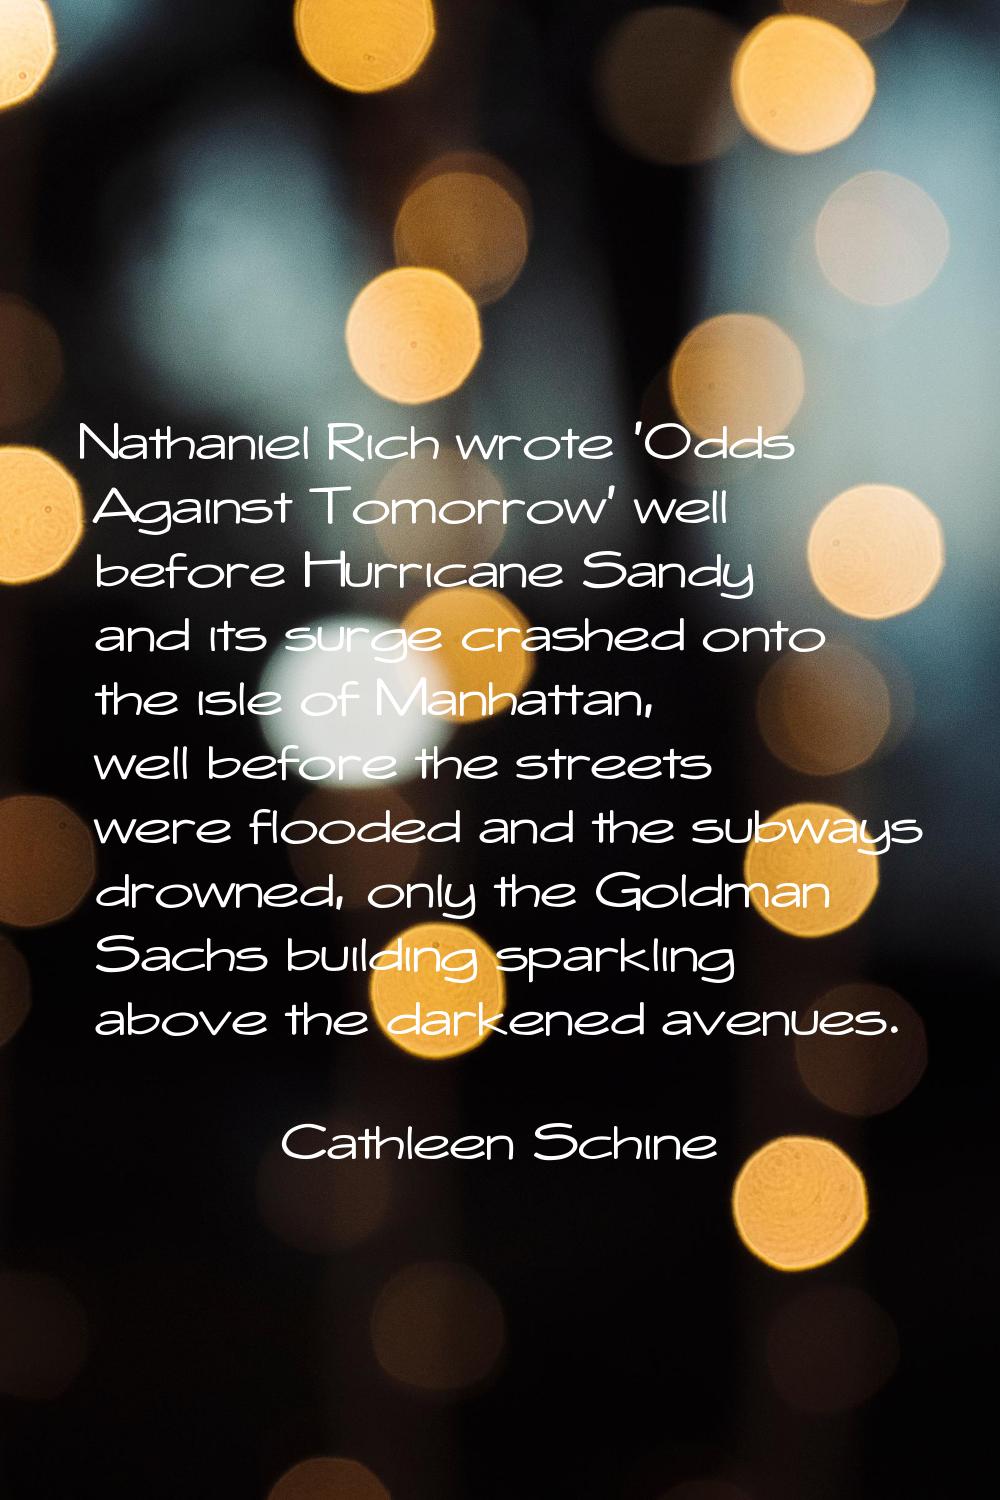 Nathaniel Rich wrote 'Odds Against Tomorrow' well before Hurricane Sandy and its surge crashed onto